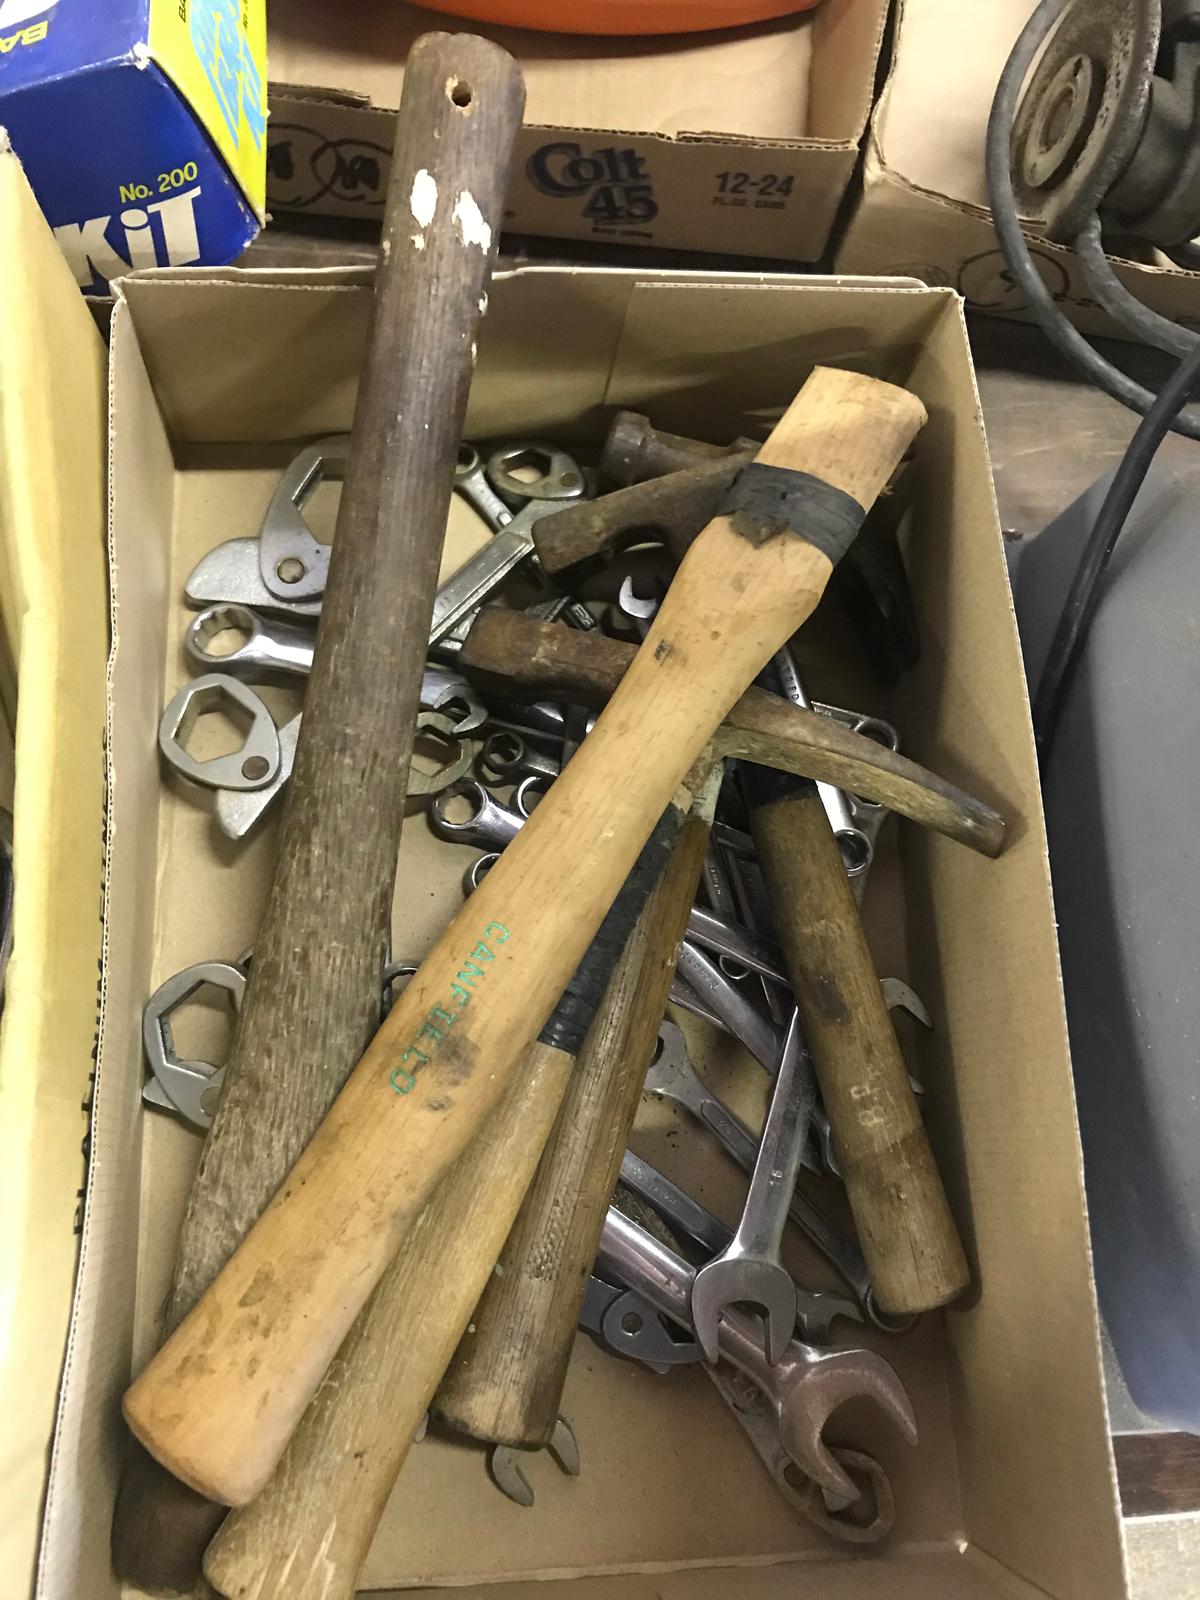 Lot of Wrenches & Hammers (lot 2)